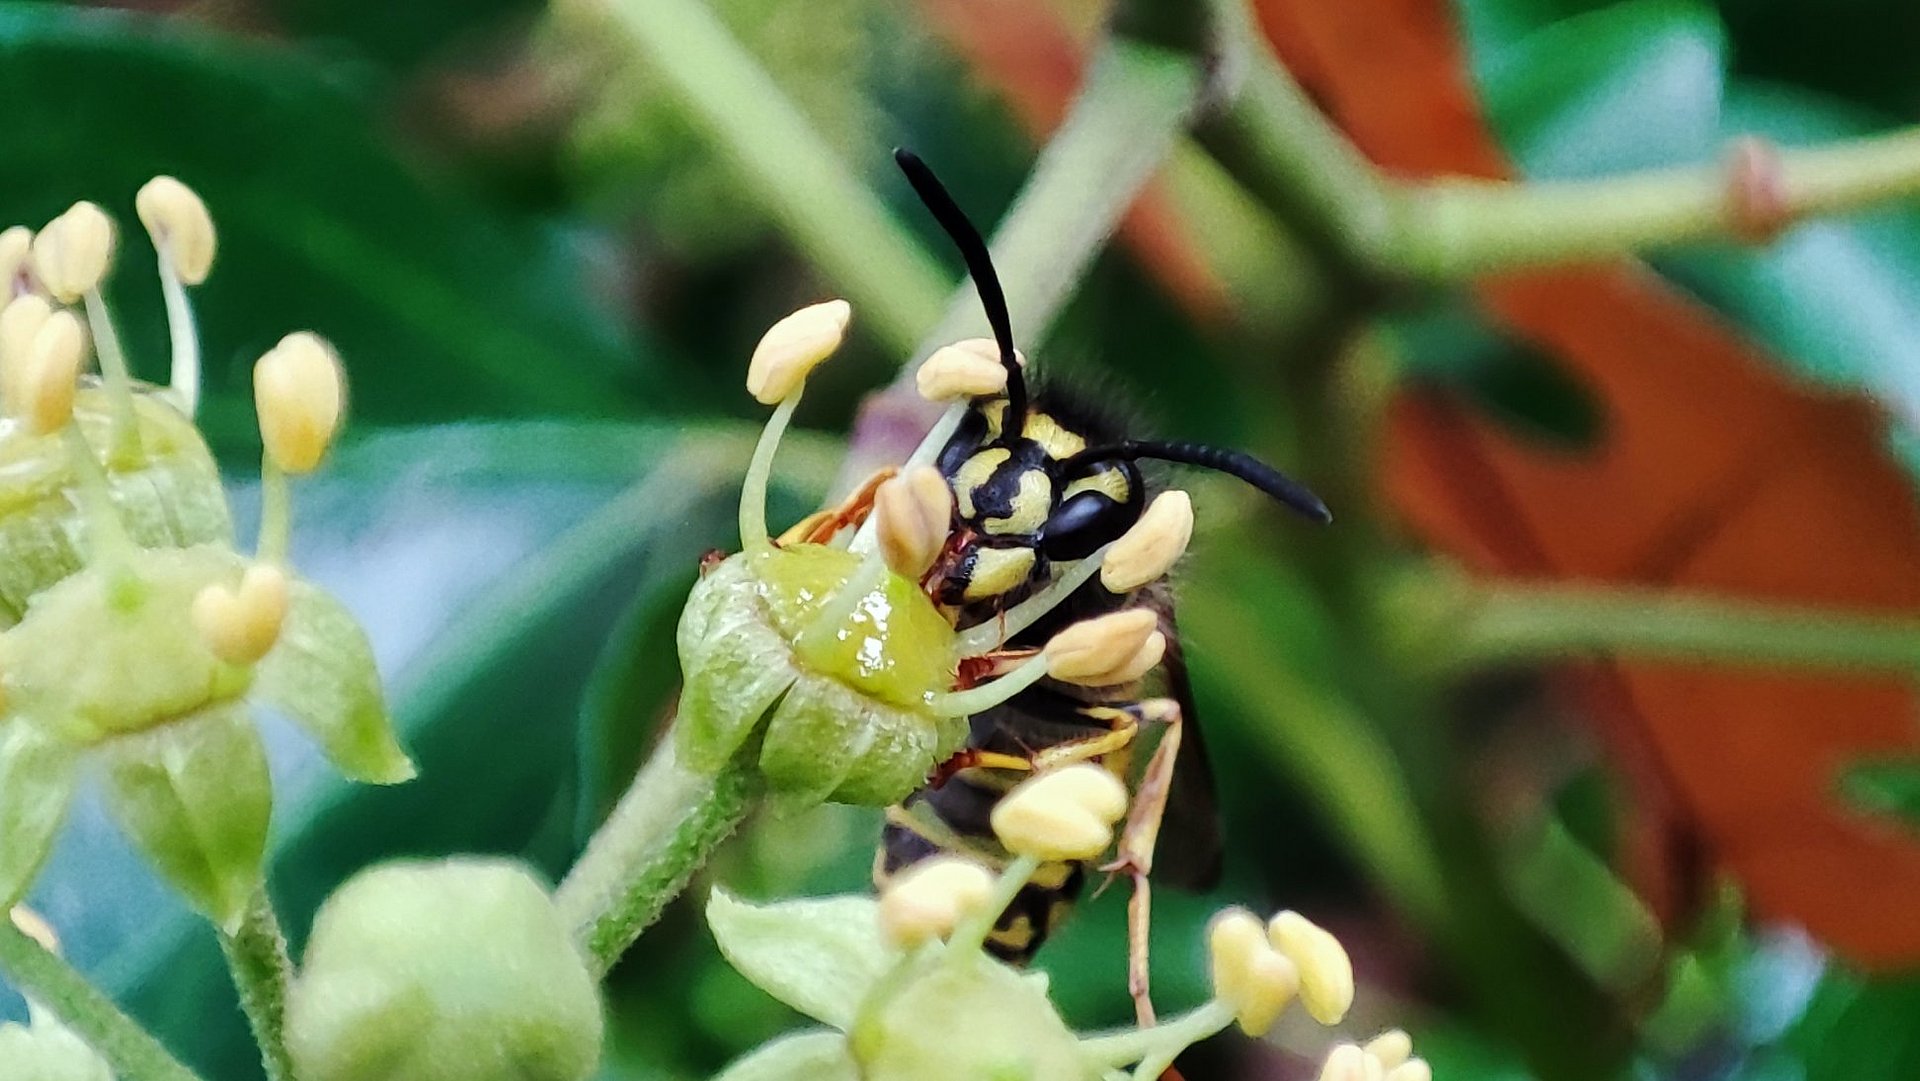 Wasp on flower